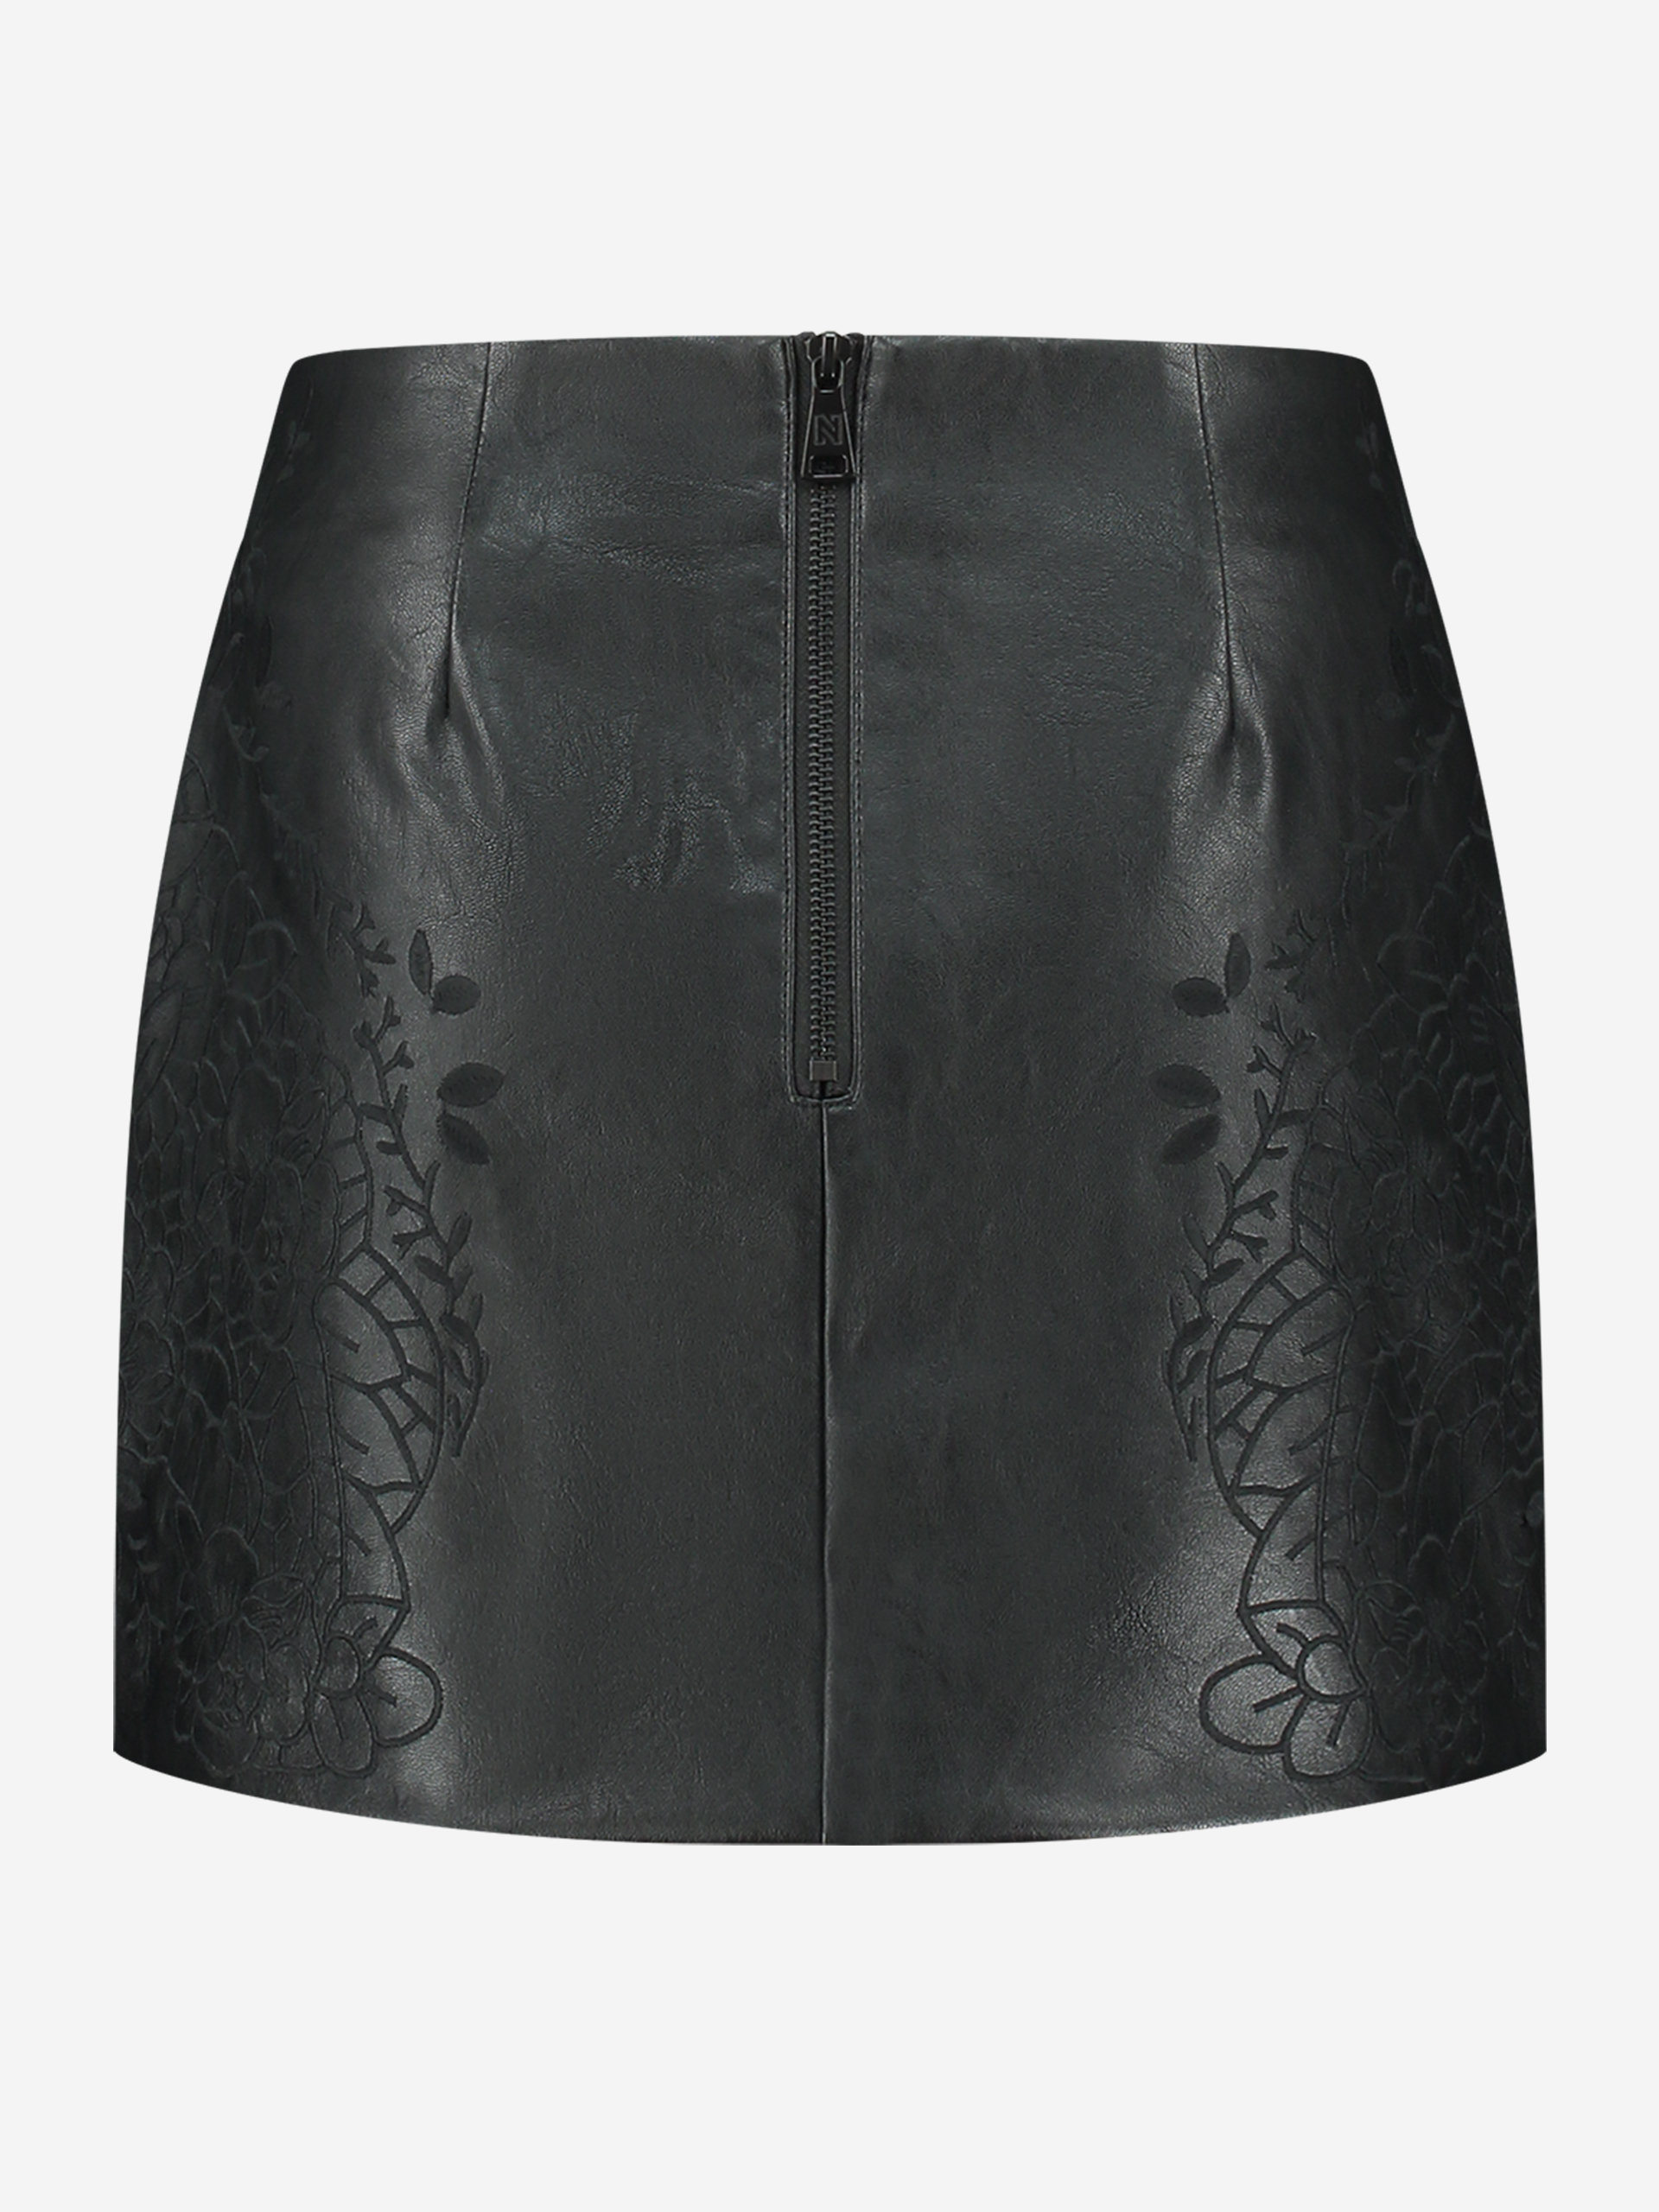 Vegan leather skirt with embroidery details 